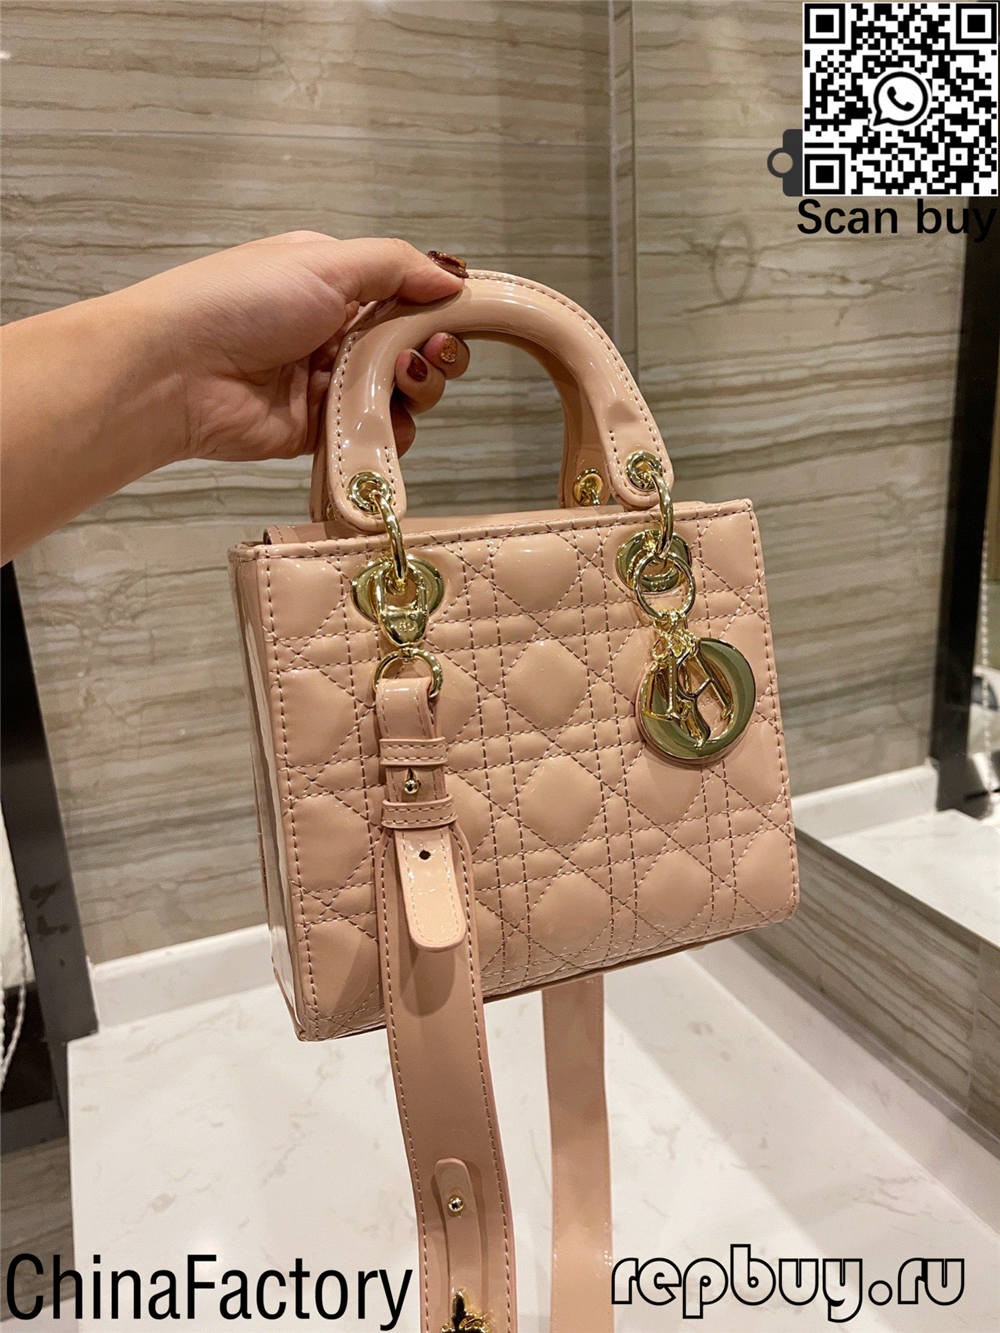 Dior most worth buying 12 replica bags (2022 updated)-Best Quality Fake Louis Vuitton Bag Online Store, Replica designer bag ru